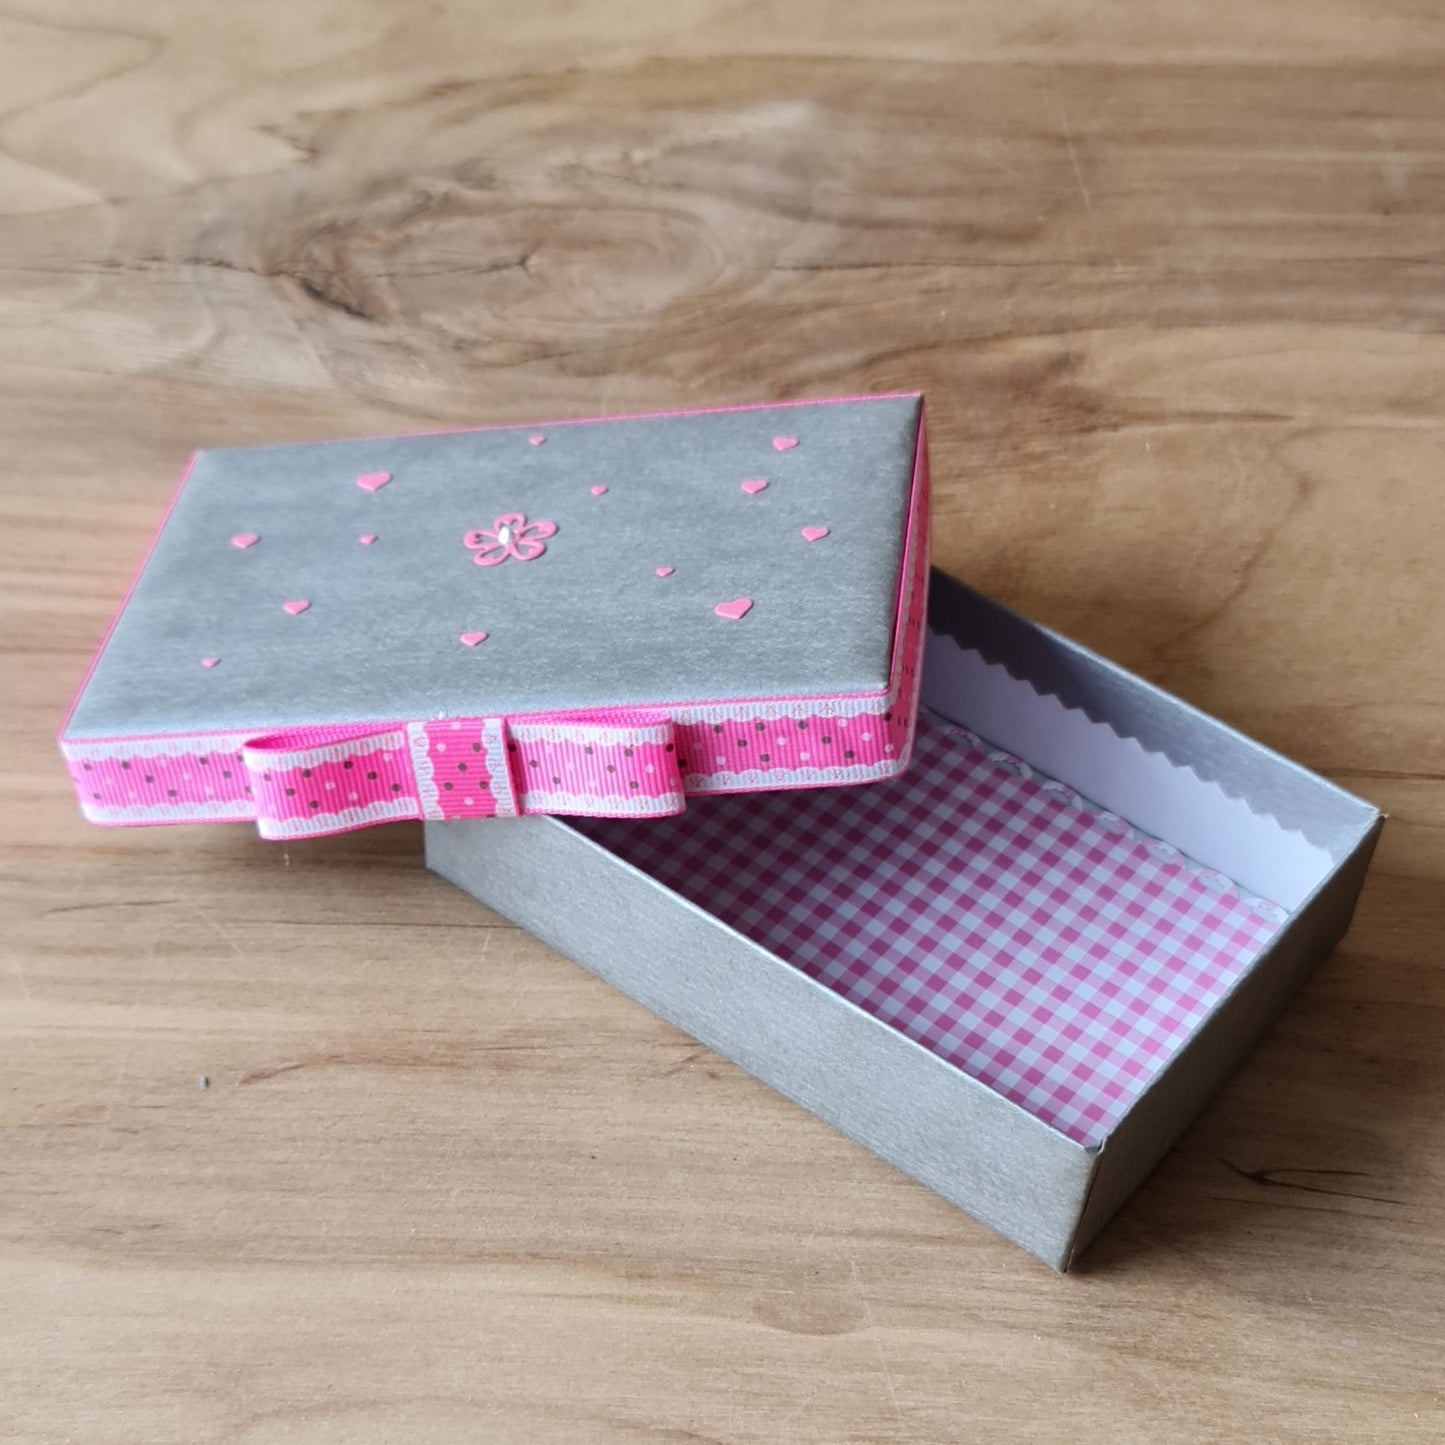 Gift box (inner dimensions 11.8 x 7.8 cm) in silver color with pink ribbon around the edge of the lid and pink/white checkered interior (APU2)